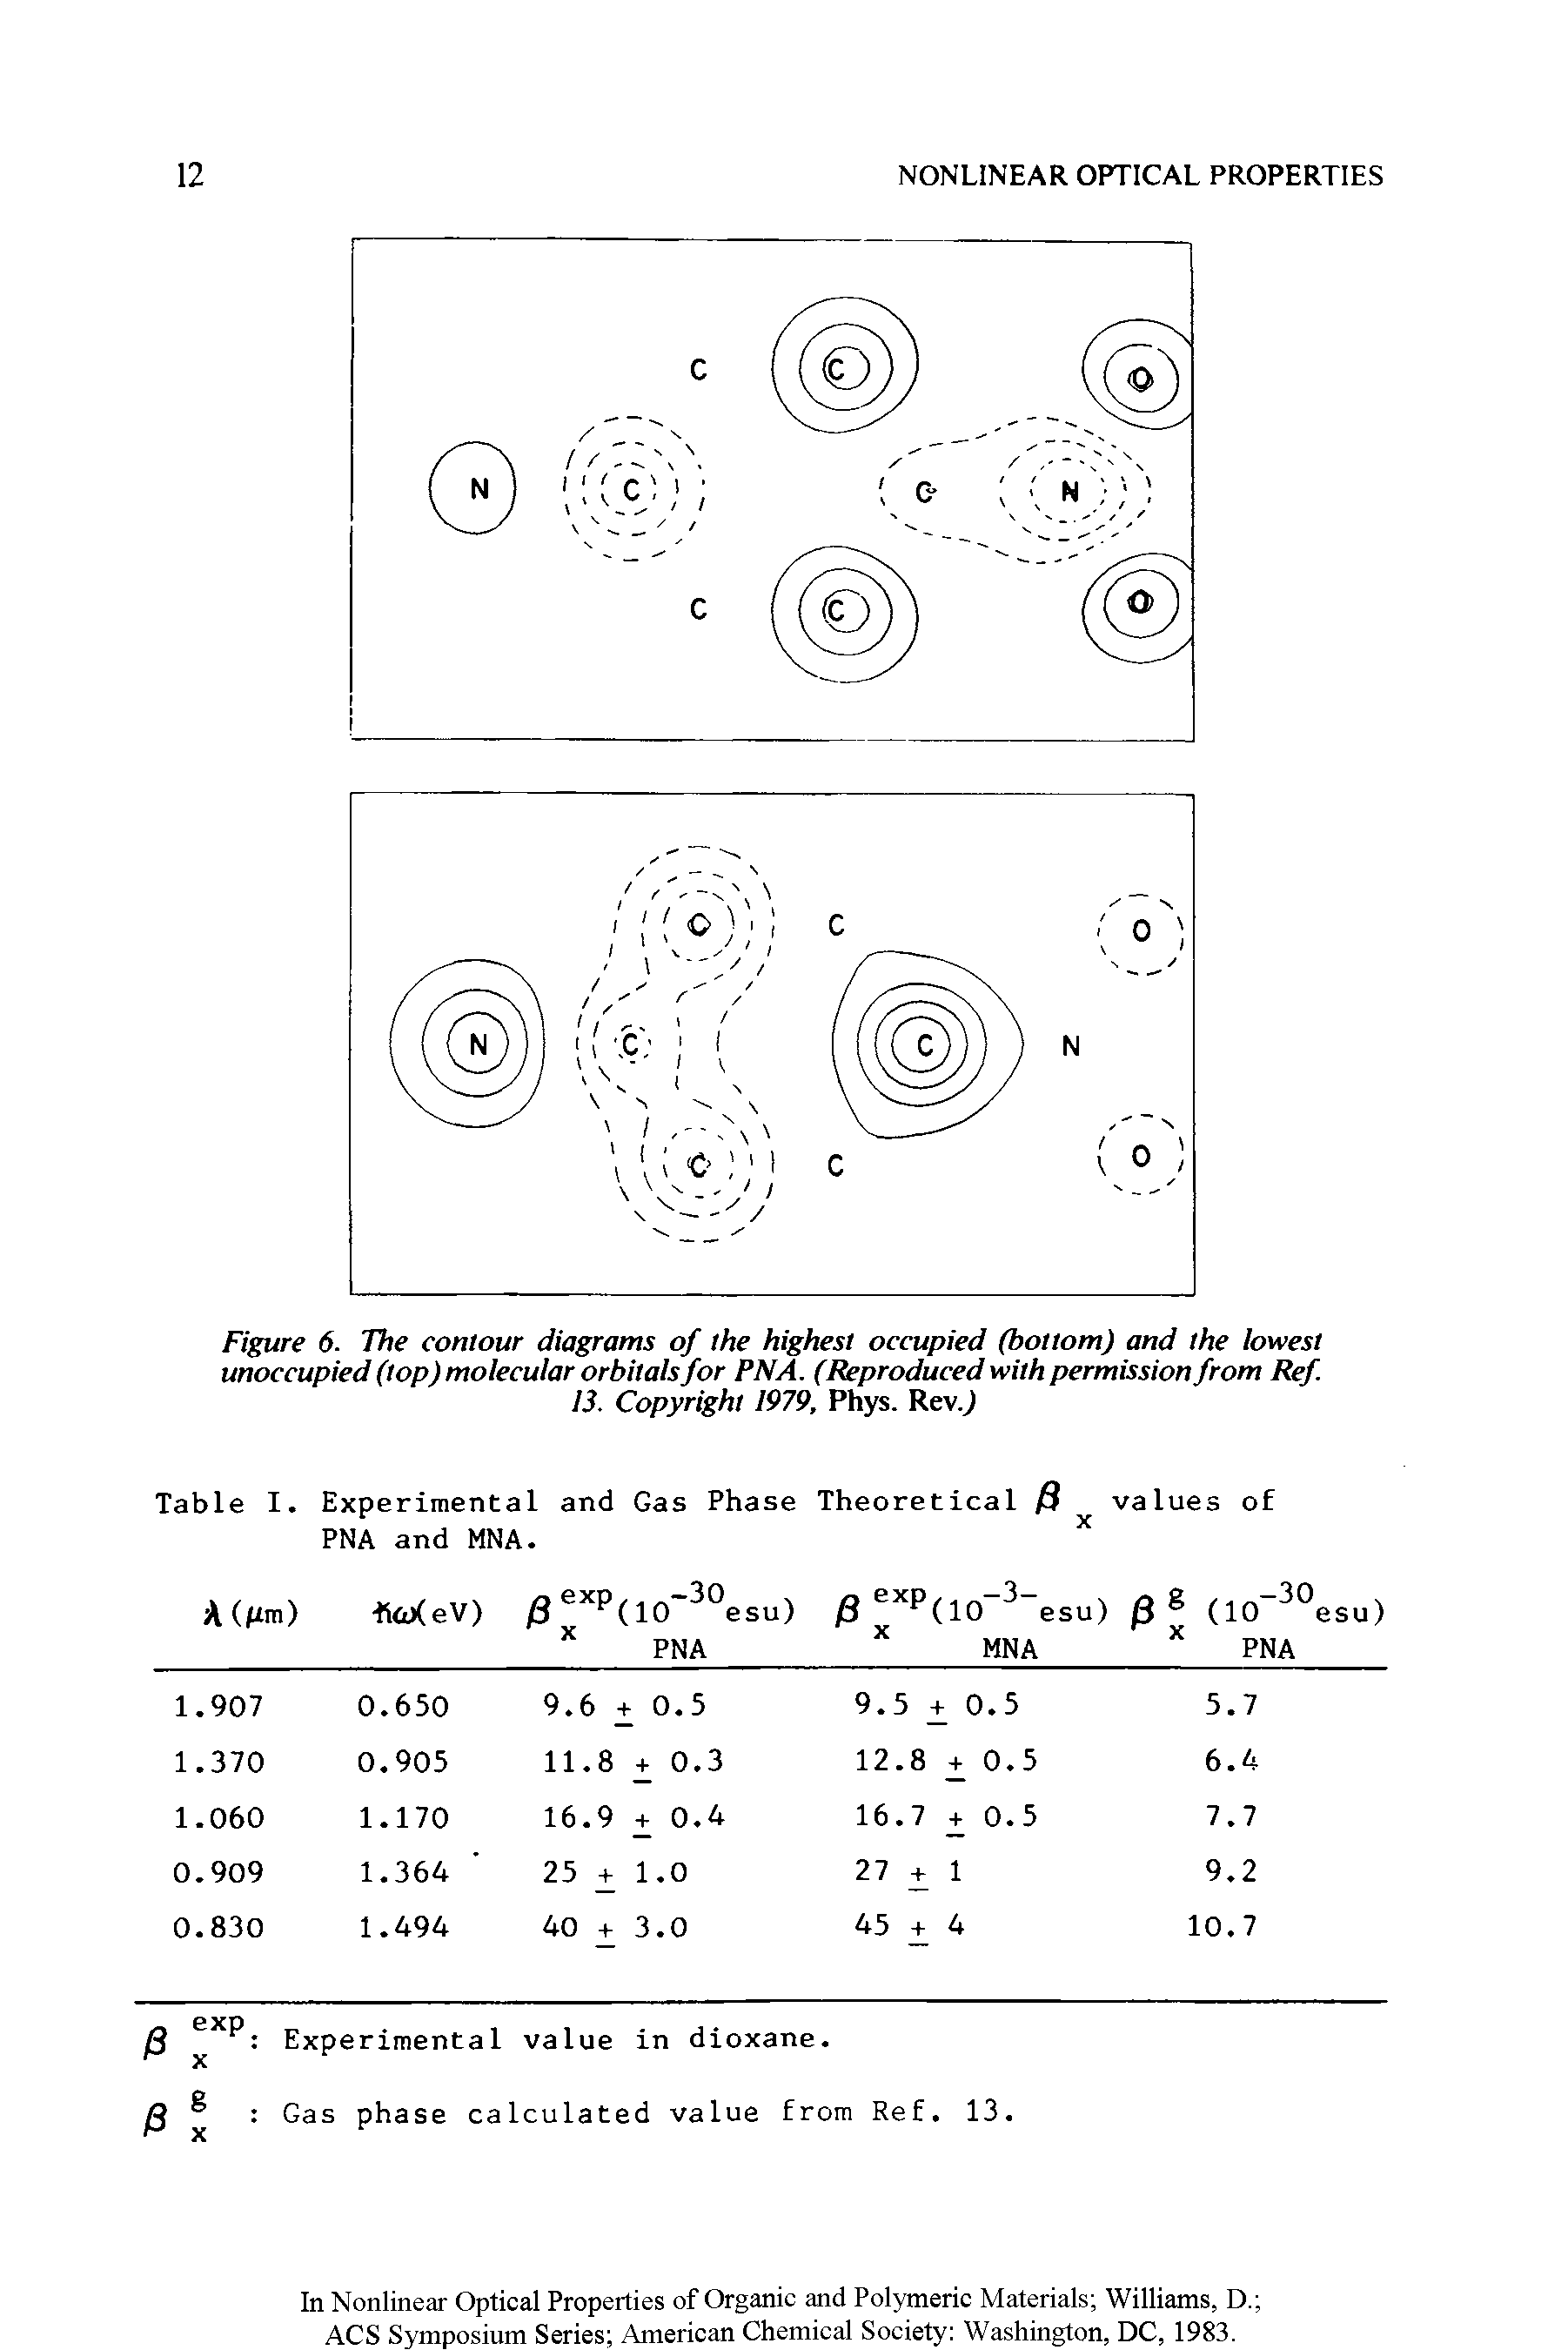 Figure 6. The contour diagrams of the highest occupied (bottom) and the lowest unoccupied (top) molecular orbitals for PNA. (Reproduced with permission from Ref 13. Copyright 1979, Phys. RevJ...